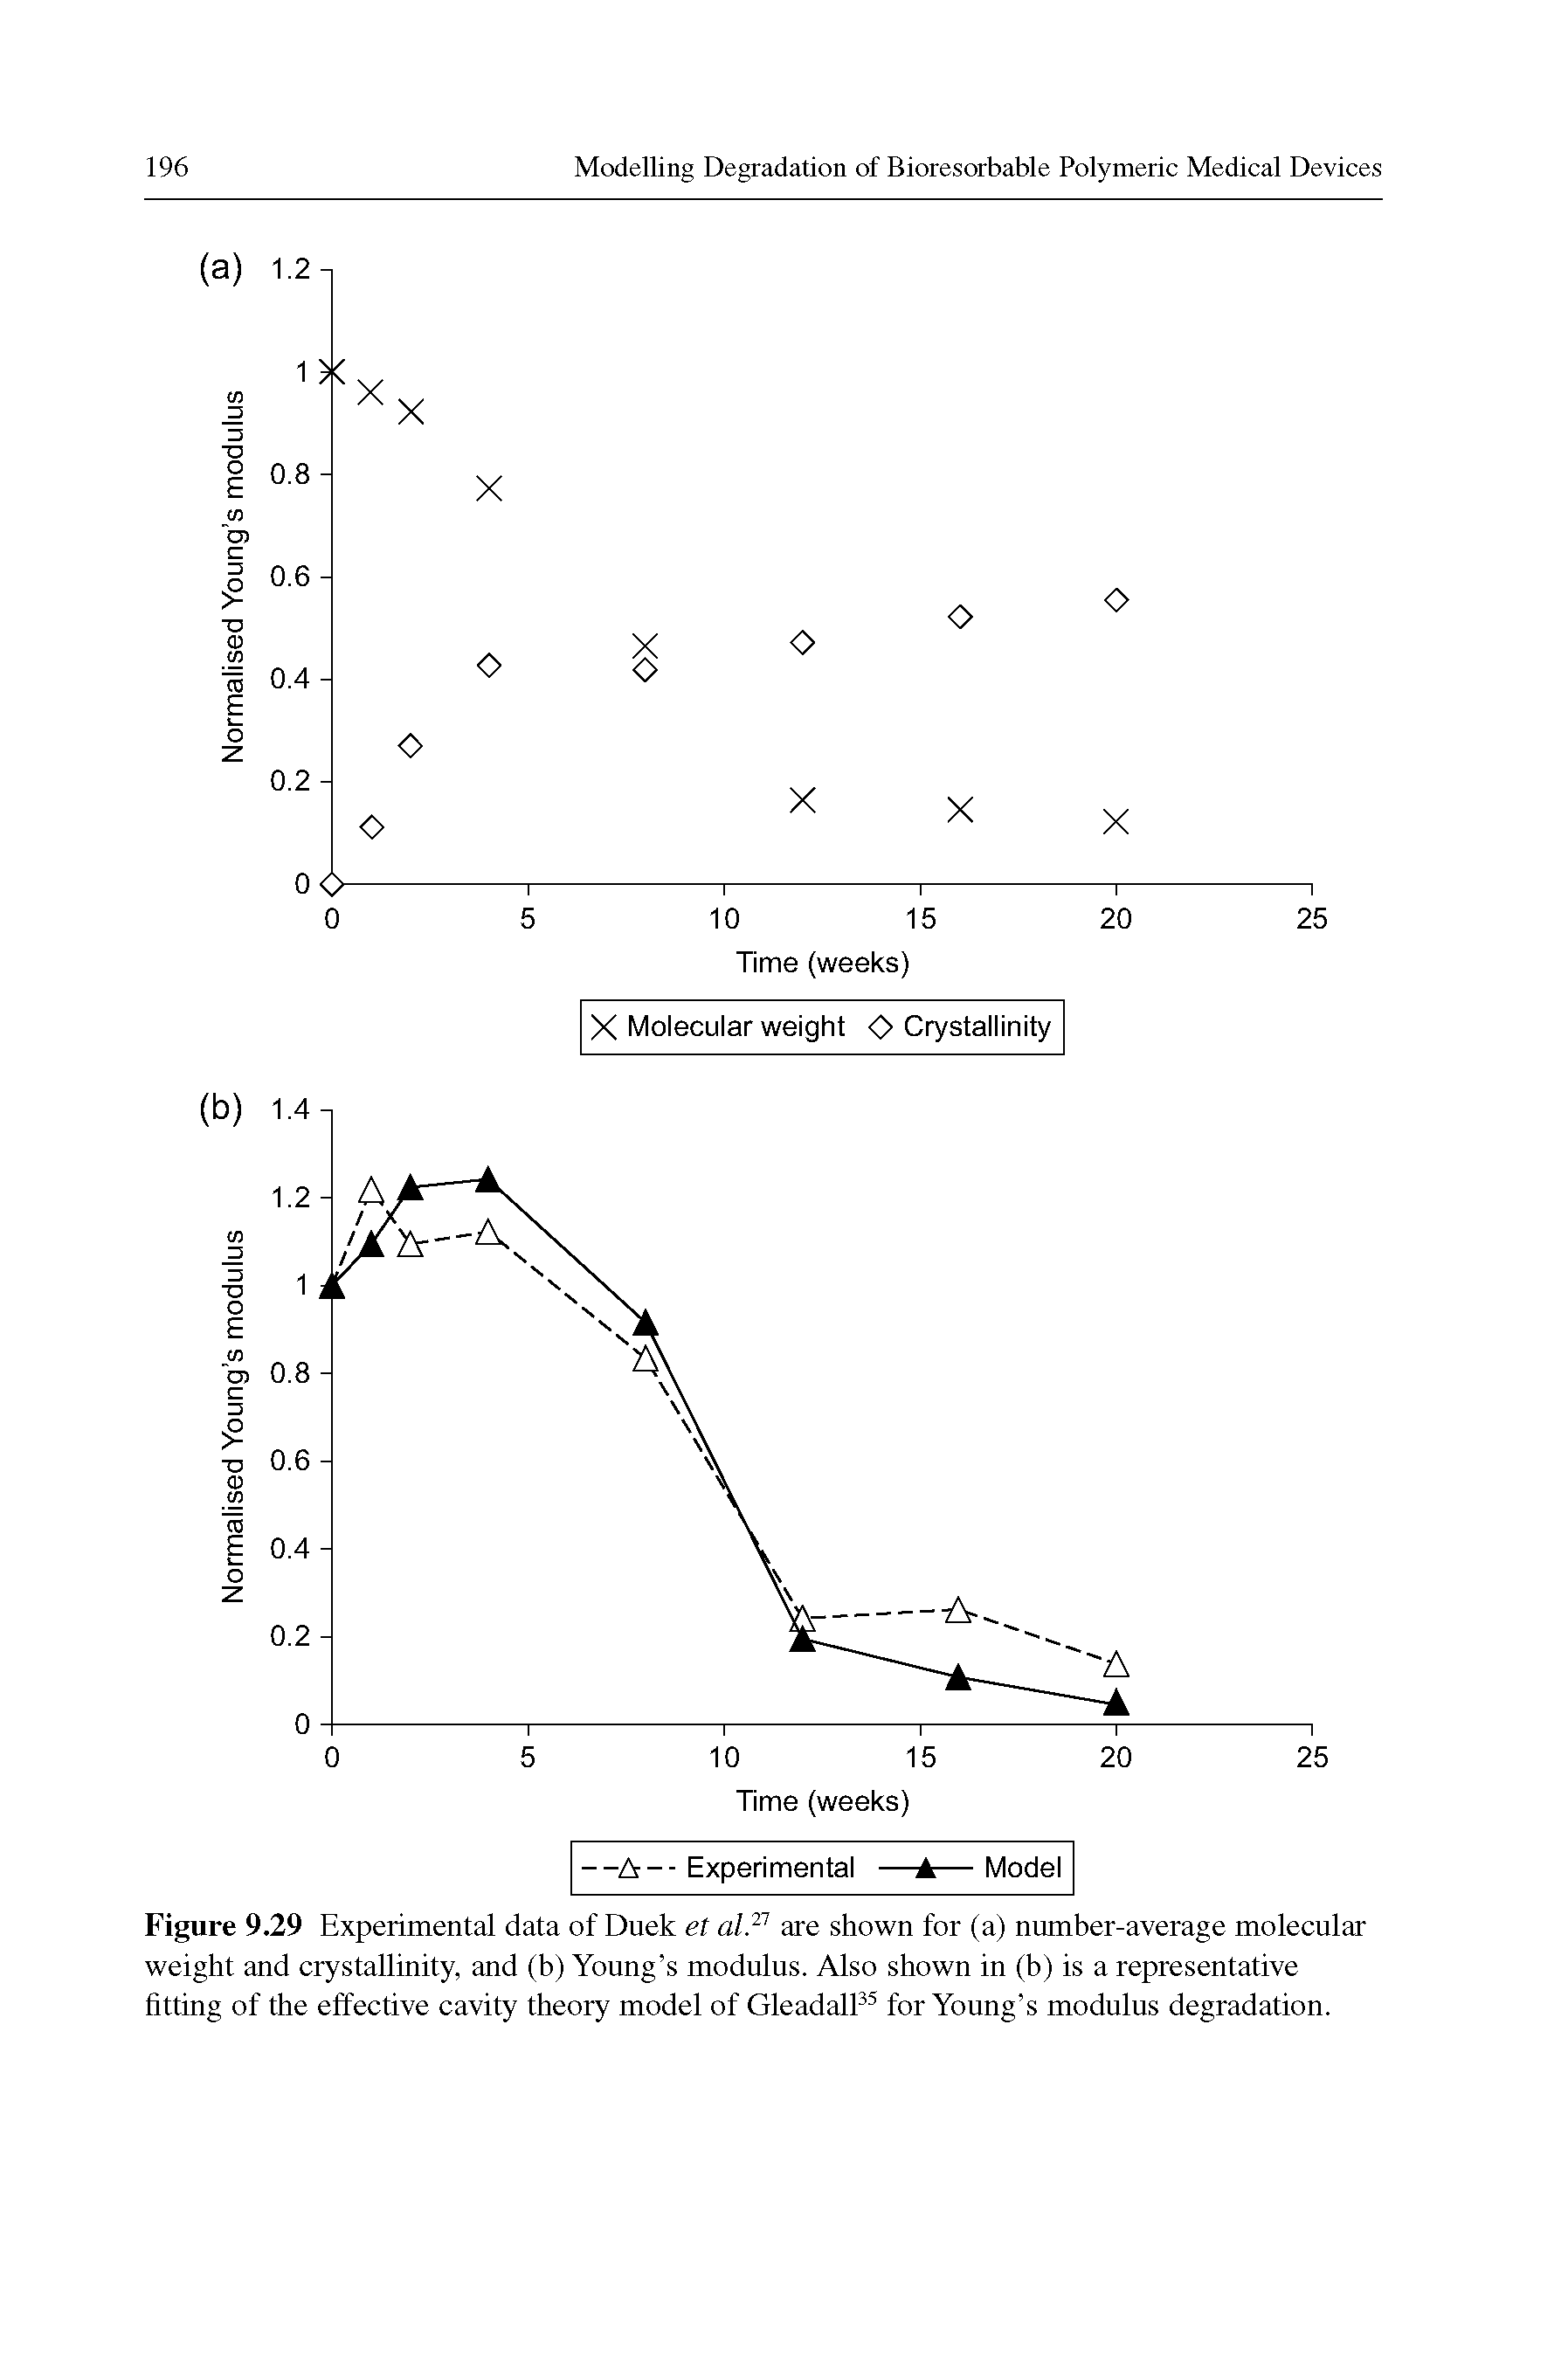 Figure 9.29 Experimental data of Duek et al. are shown for (a) number-average molecular weight and crystallinity, and (b) Young s modulus. Also shown in (b) is a representative fitting of the effective cavity theory model of GleadalP for Young s modulus degradation.